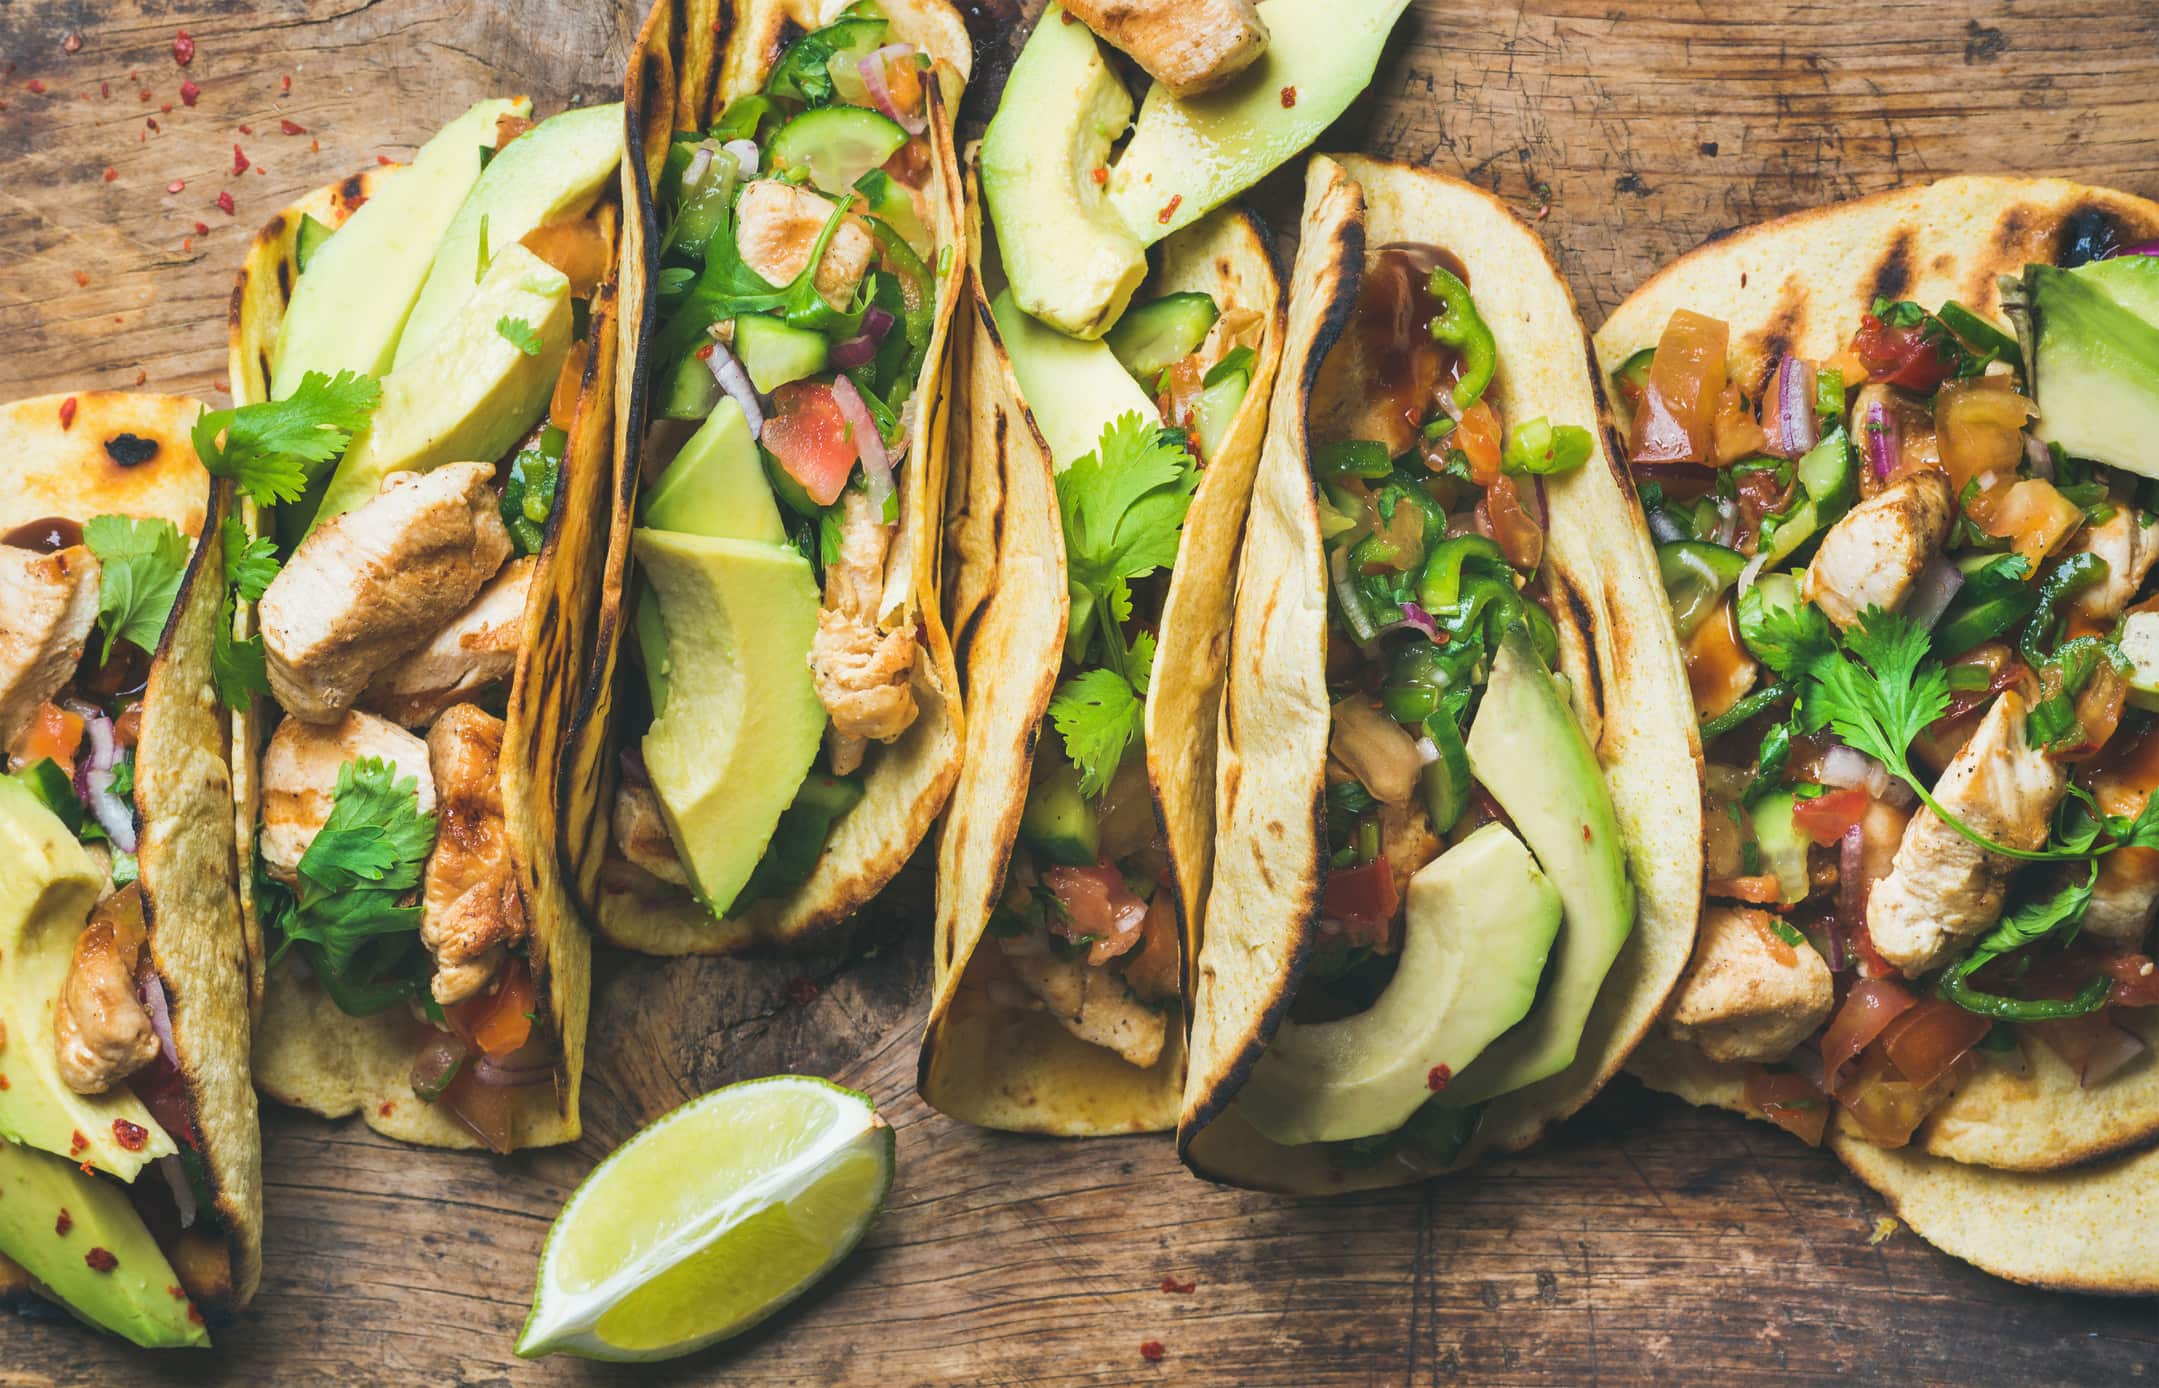 Tacos with grilled chicken, avocado, fresh salsa sauce and limes over rustic wooden background, top view. Healthy low carb and low fat lunch or food for company.